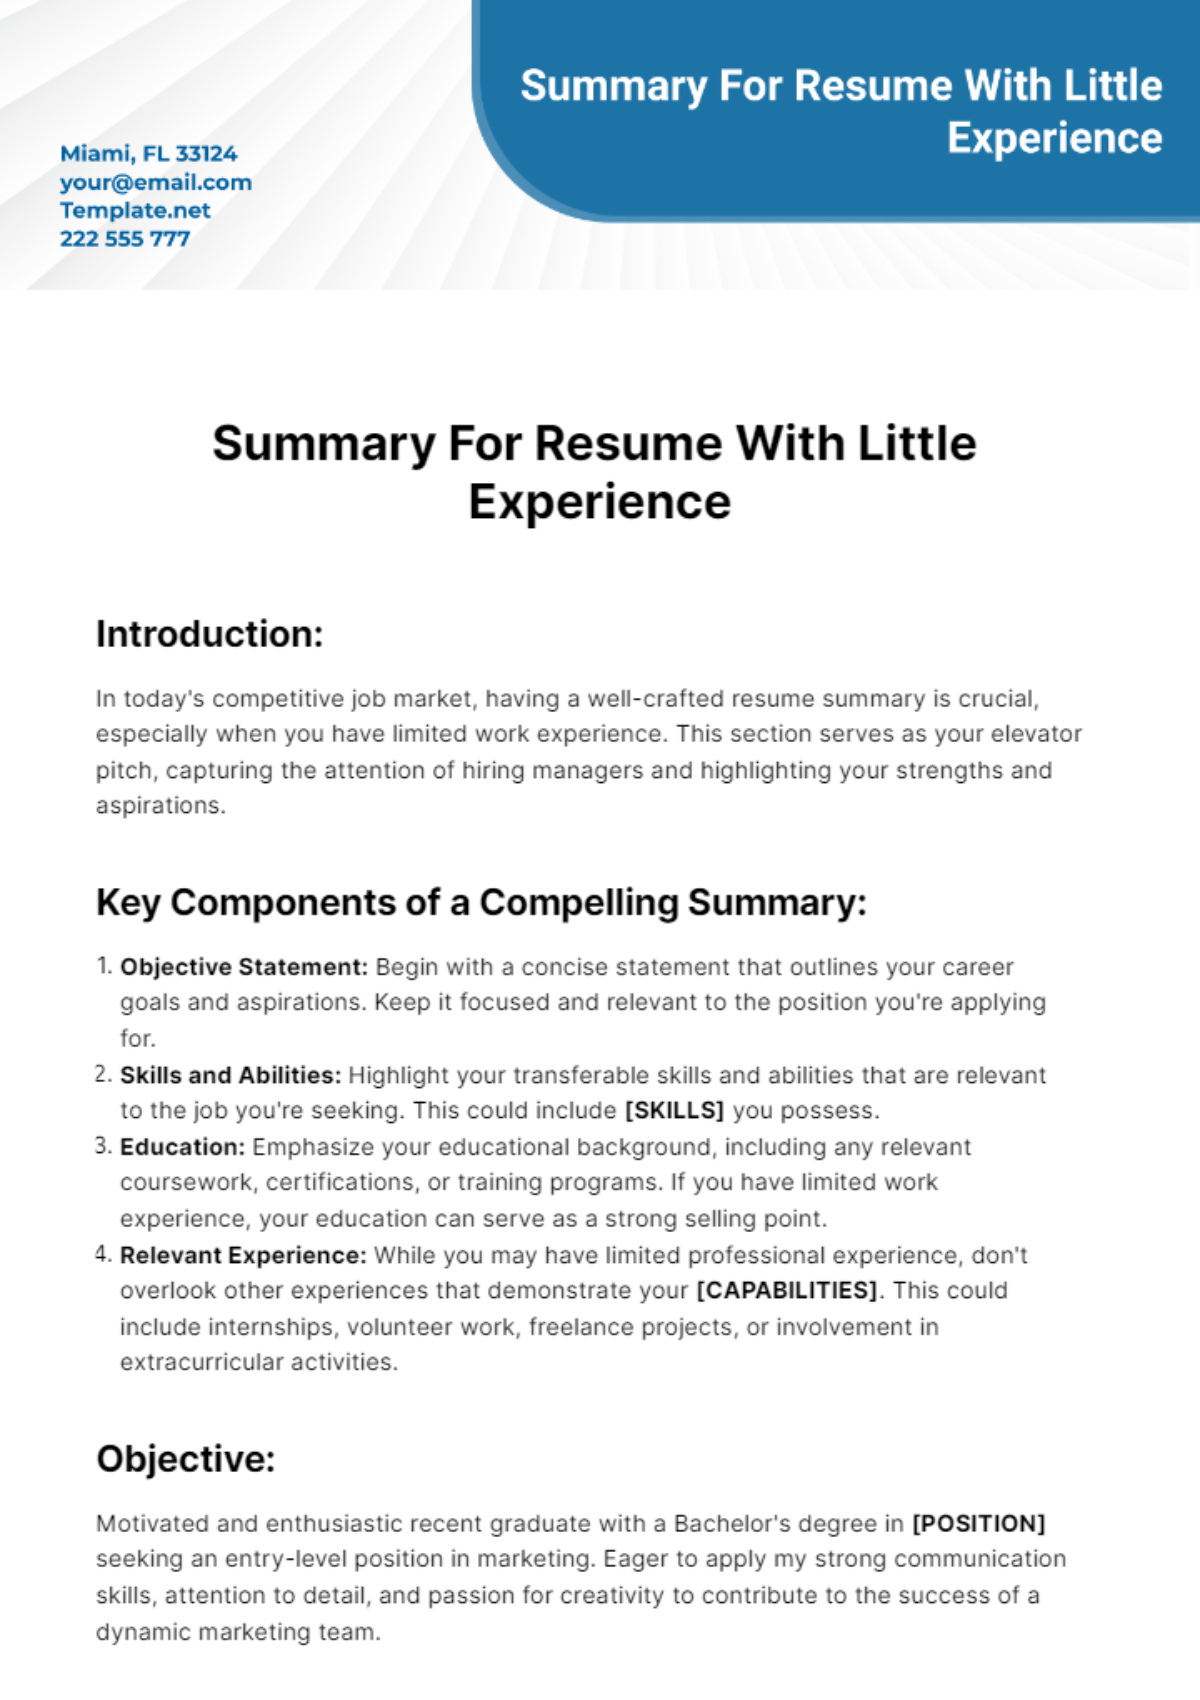 Summary For Resume With Little Experience Template